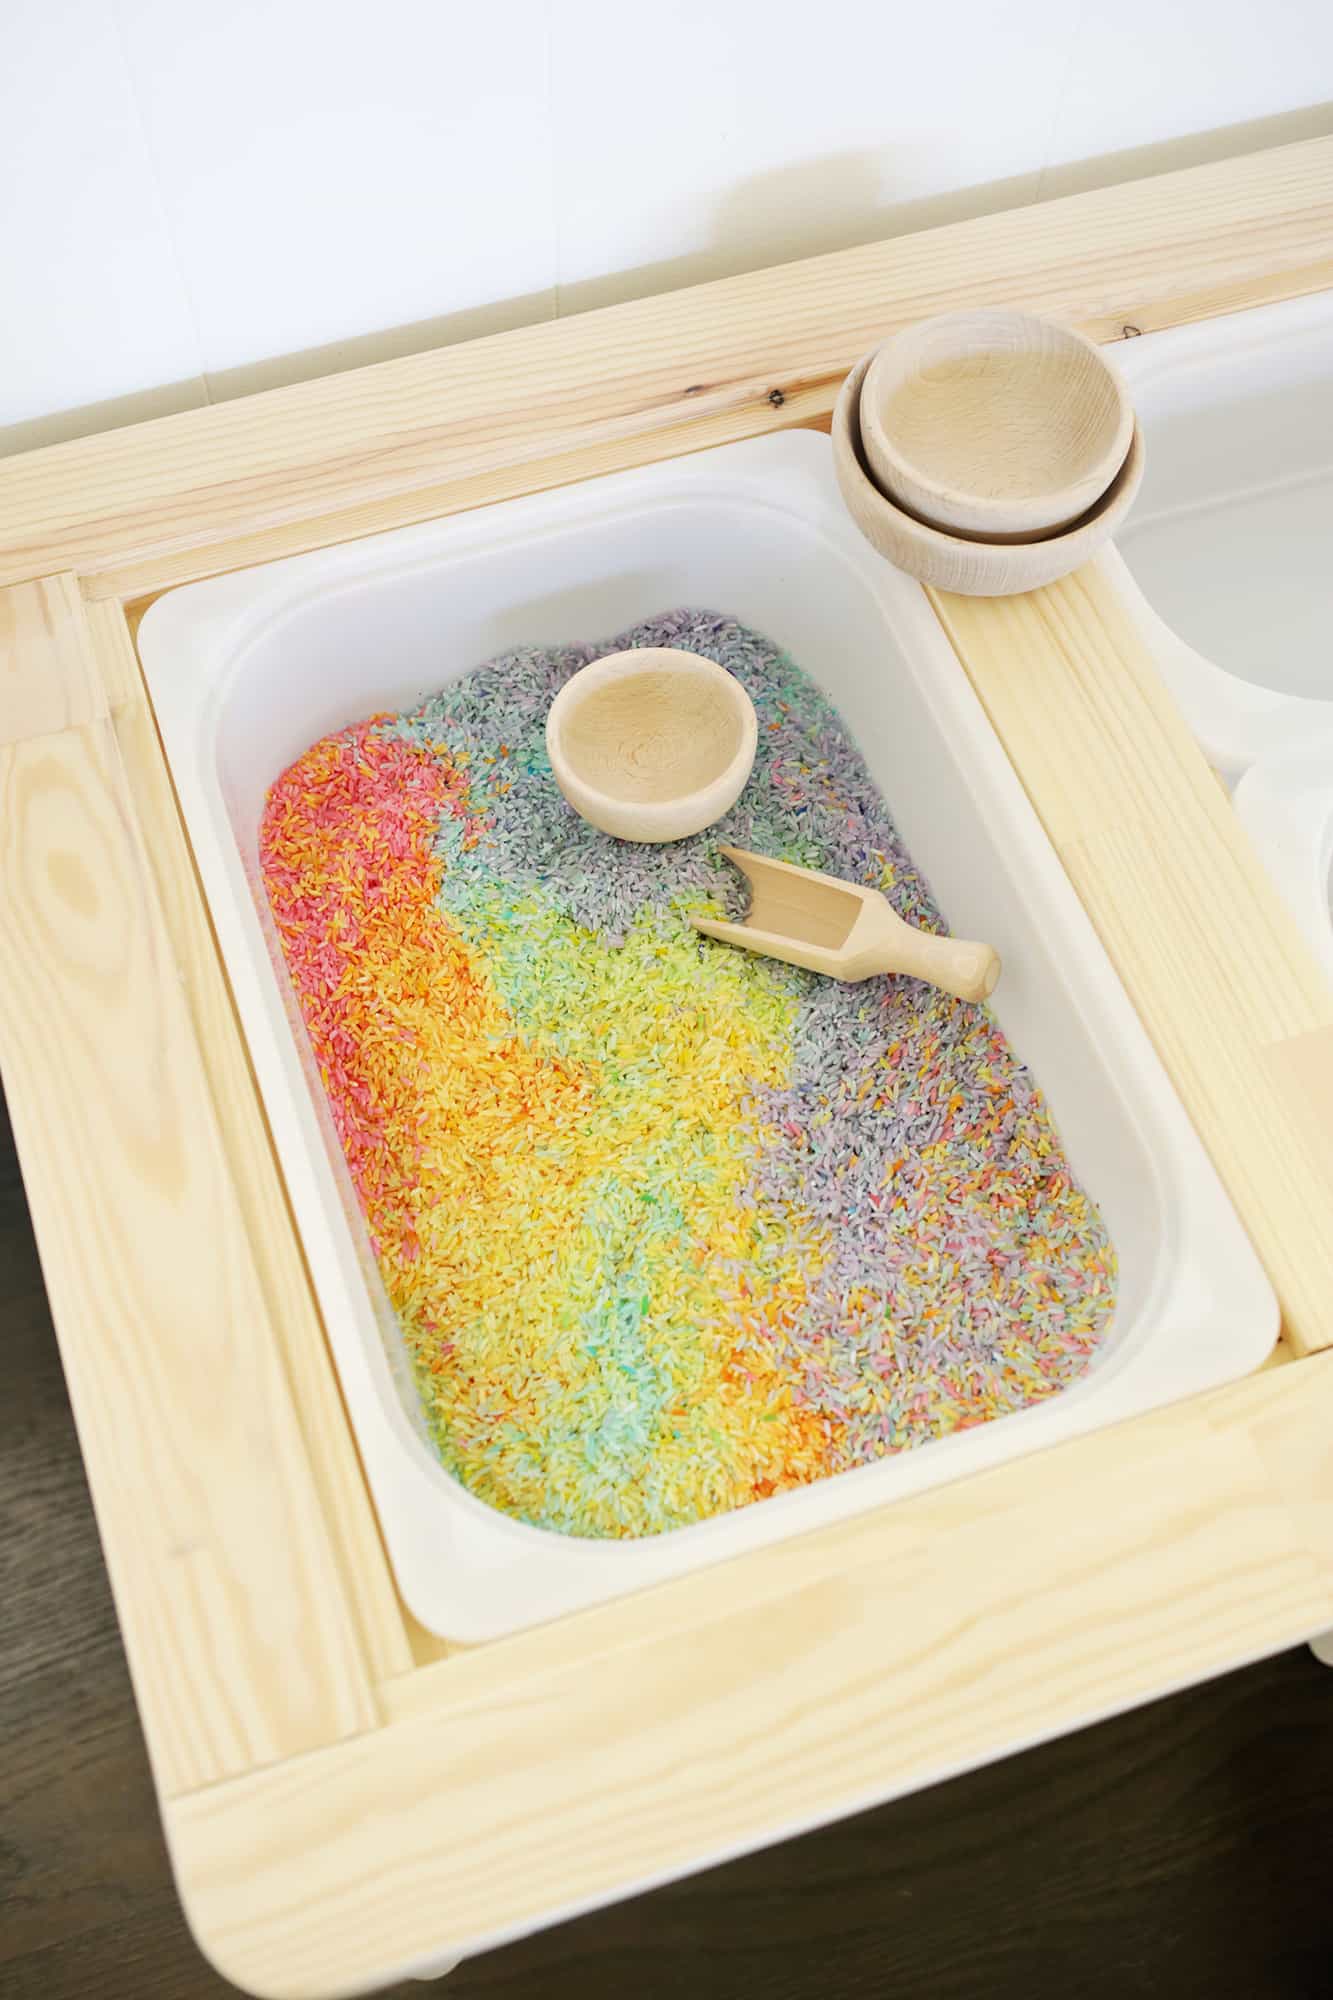 colorful rice, a wooden scoop and a wooden bowl in a white bin of the sensory table